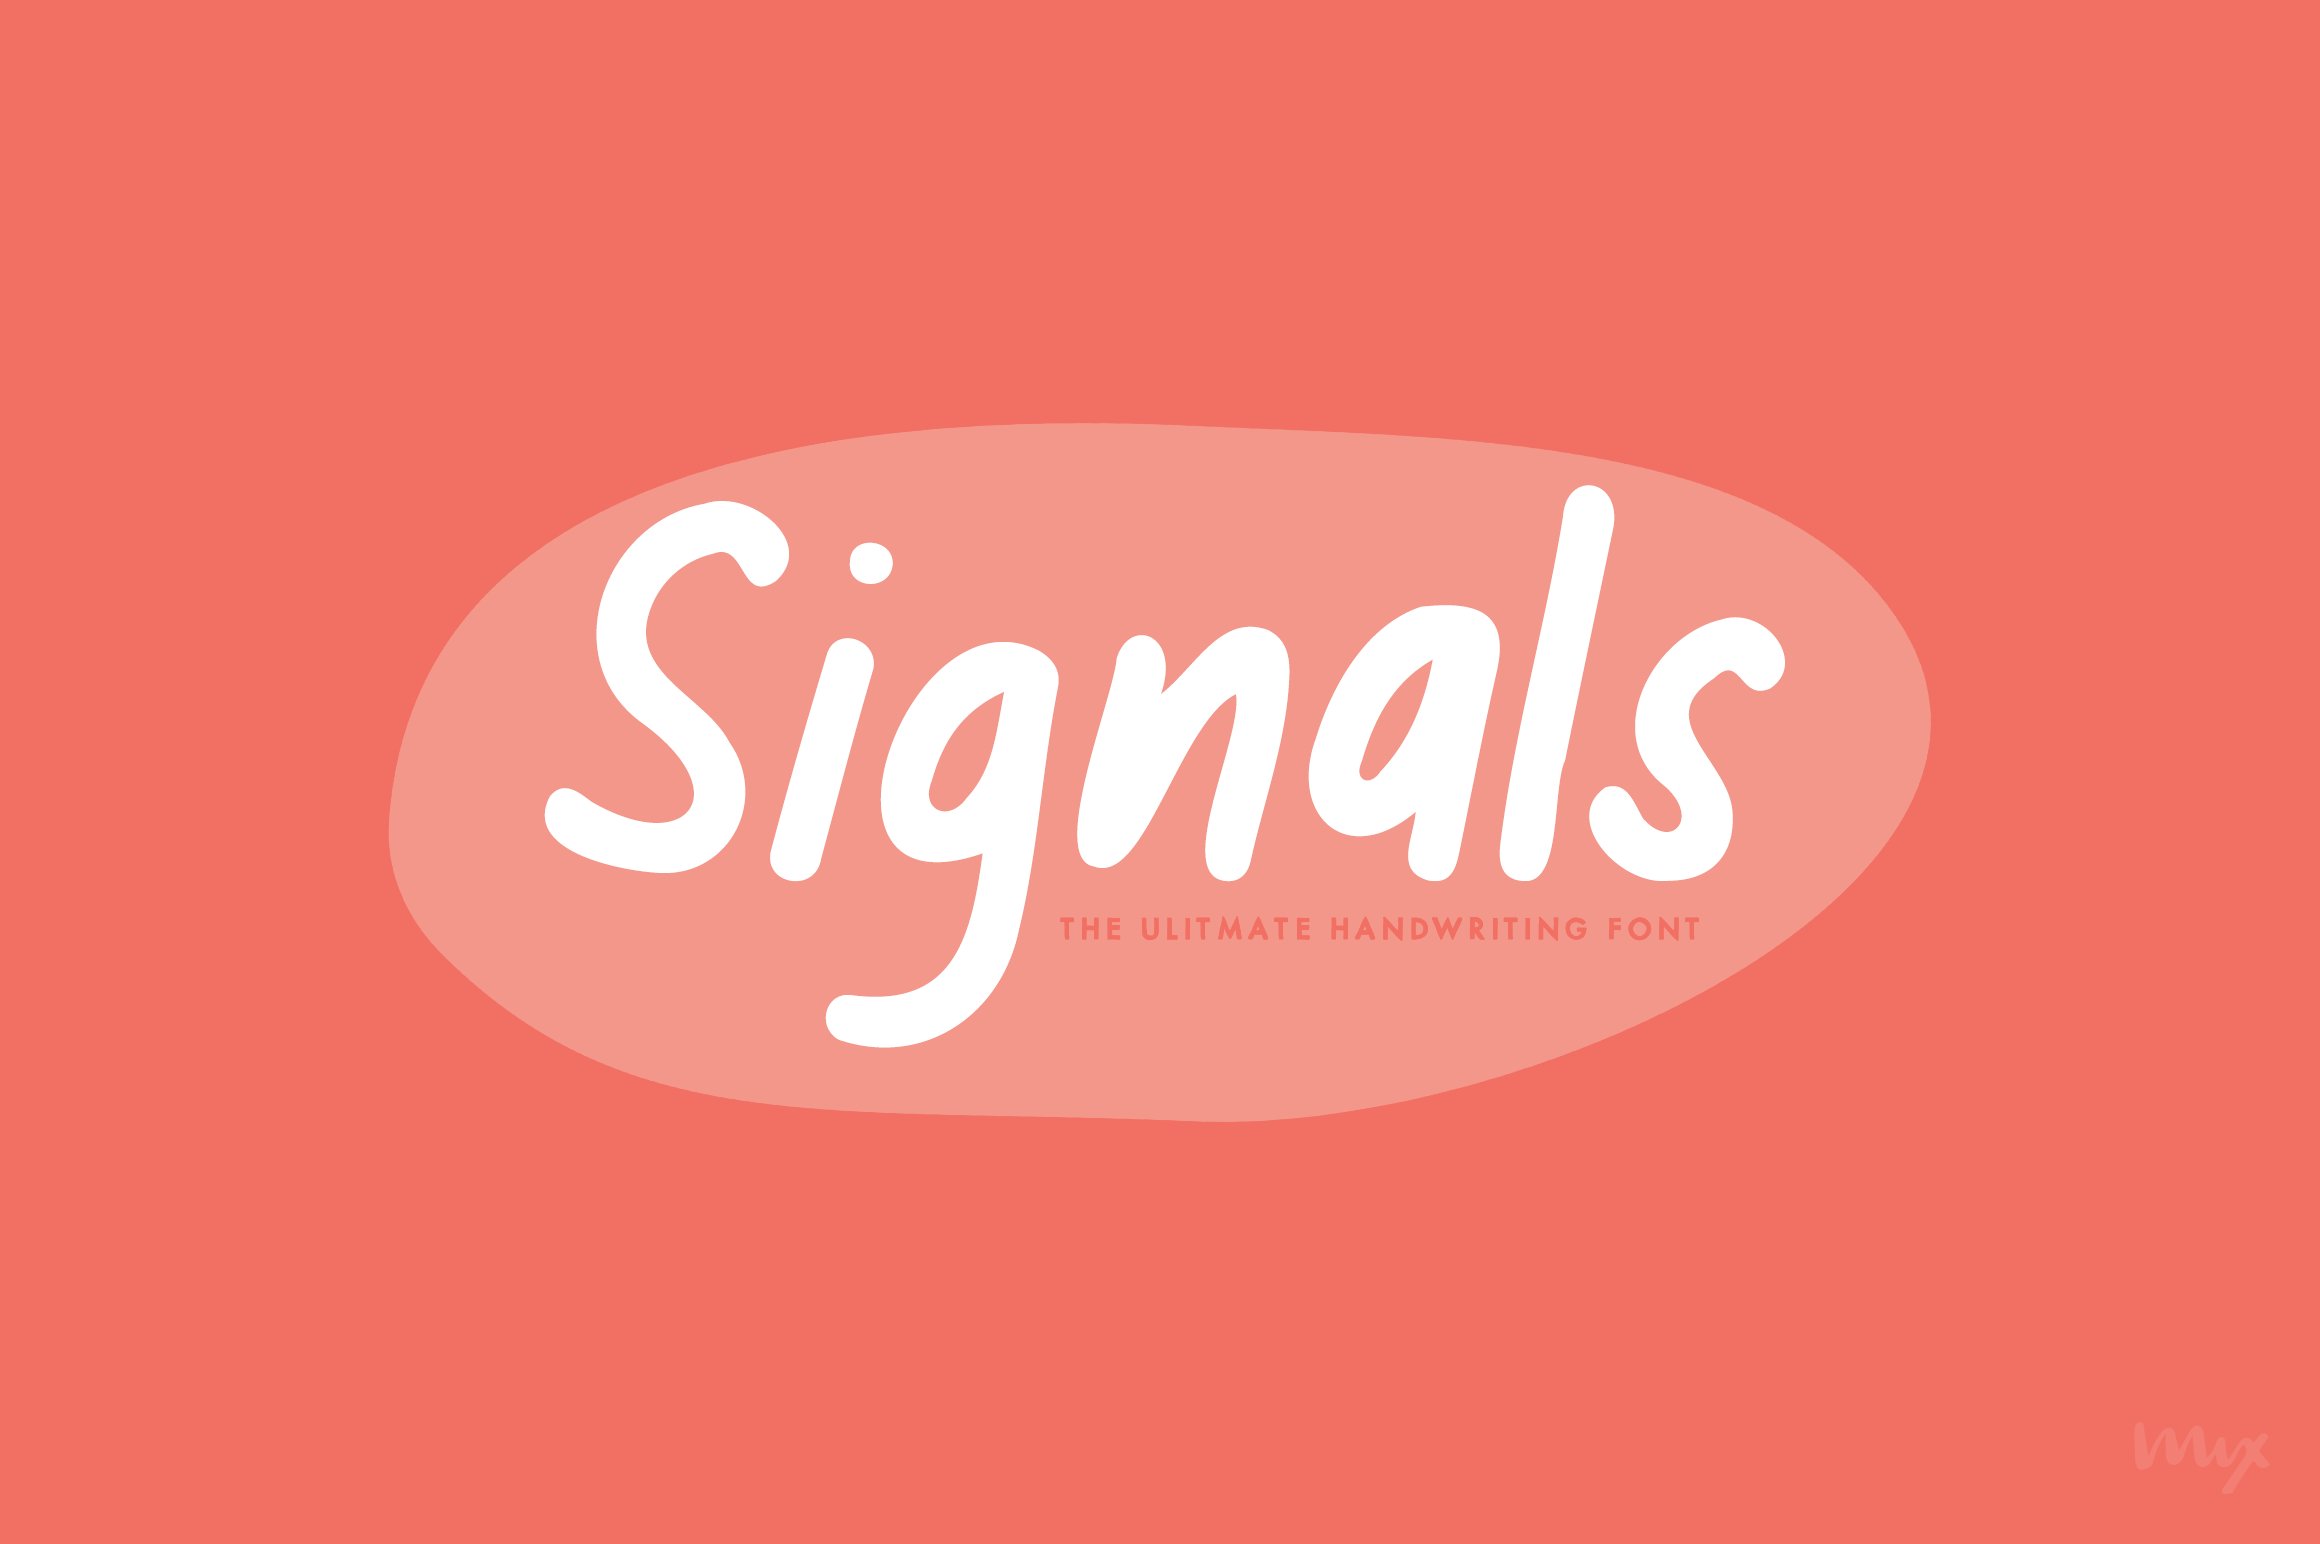 Signals - The Best Handwriting Font cover image.